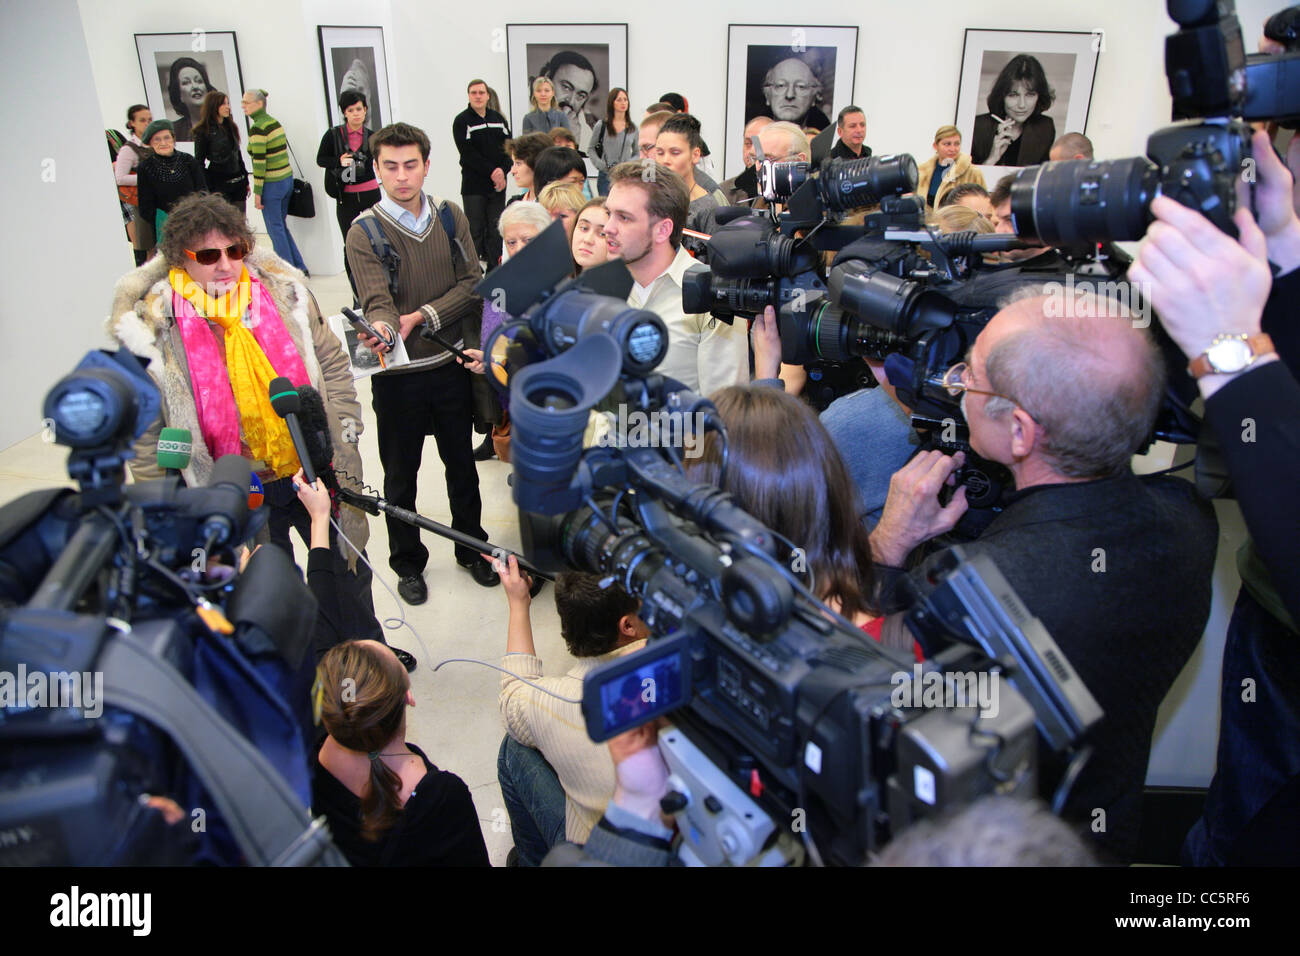 Exhibiton of Sergey Bermeniev in Moscow House of Photography Stock Photo